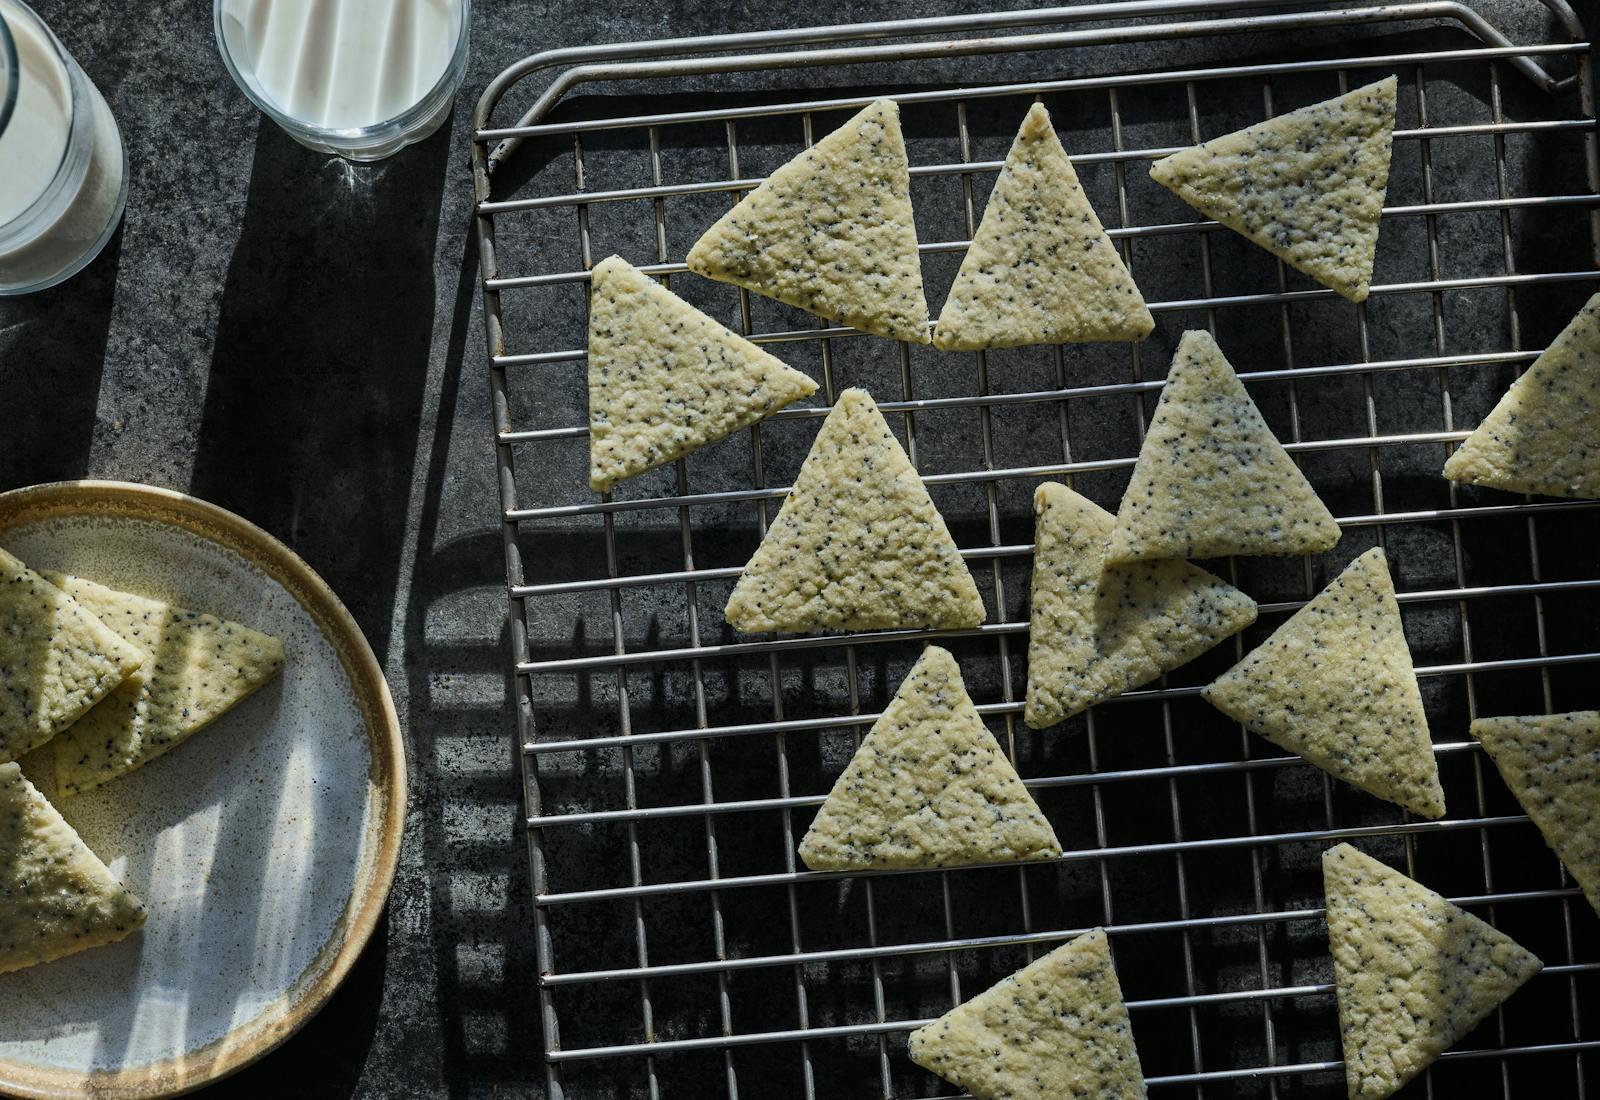 Triangular poppyseed cookies on cooling rack with a glass of milk beside them.